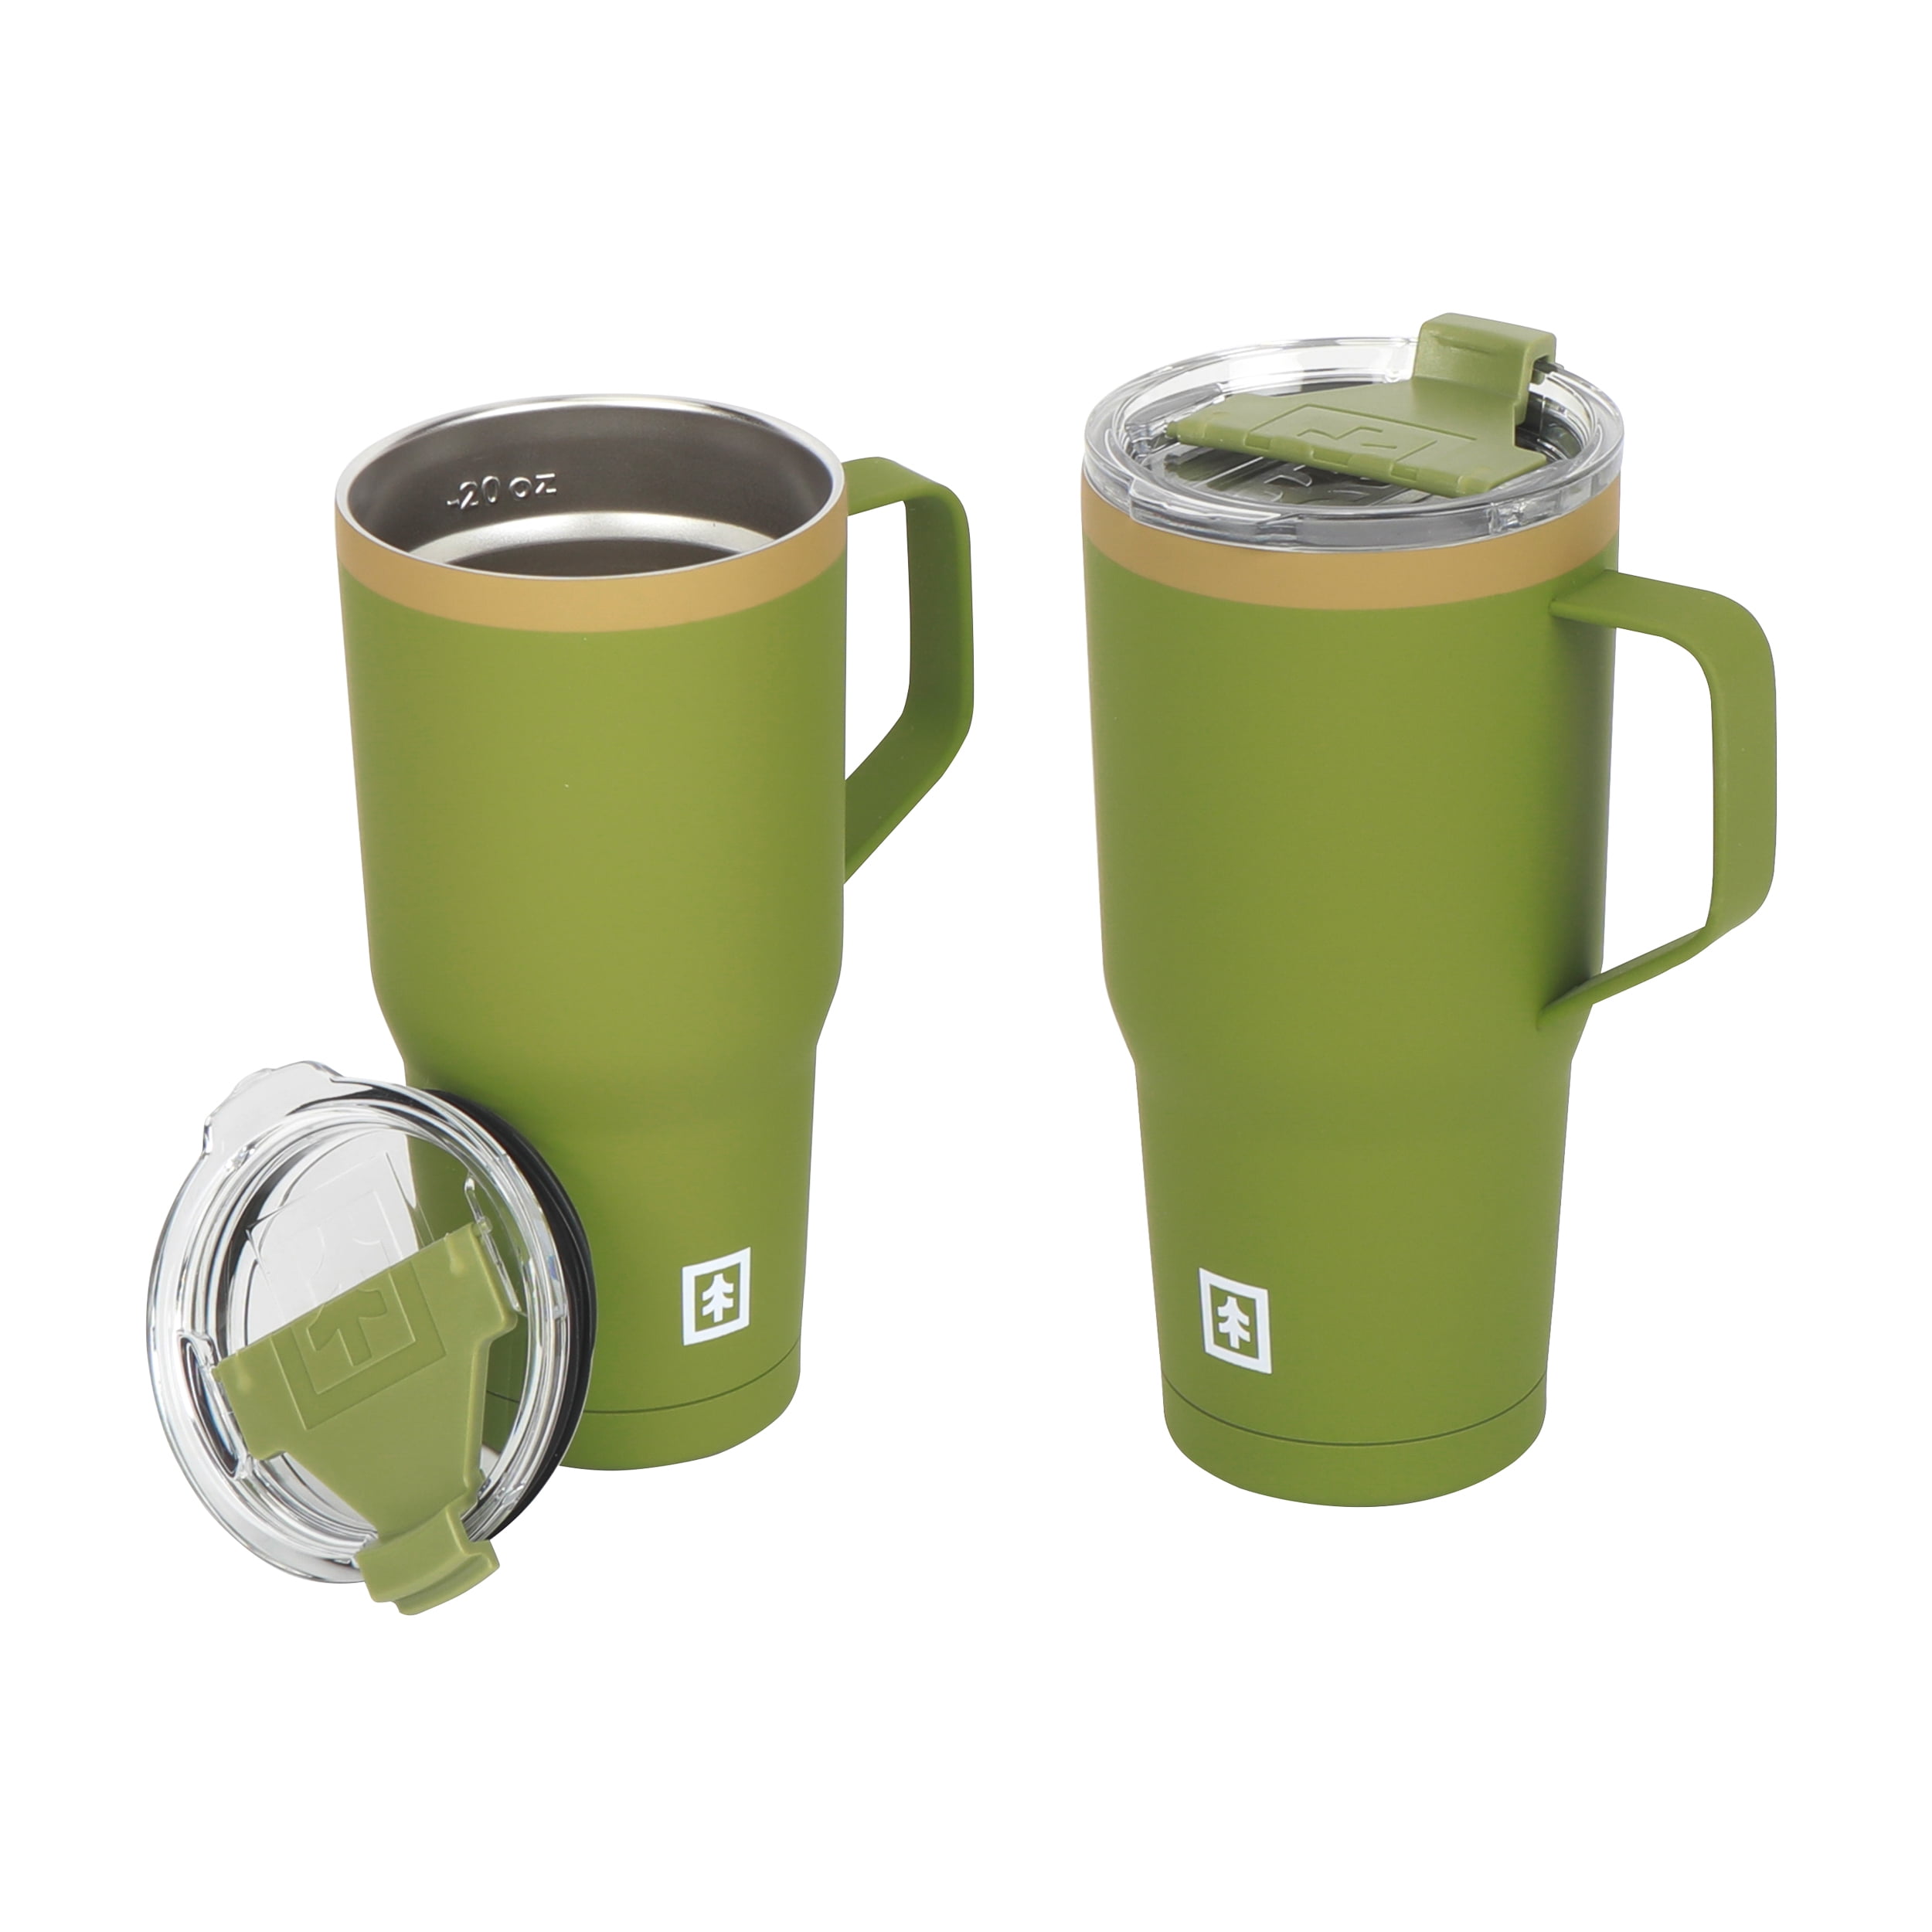 Swiss+Tech 16 oz Insulated Tumbler with Lid, 2 Pack Stainless Steel Cups, Double Wall Pint Cup Glasses (Green Turquoise&Black), Size: 16 Ounces